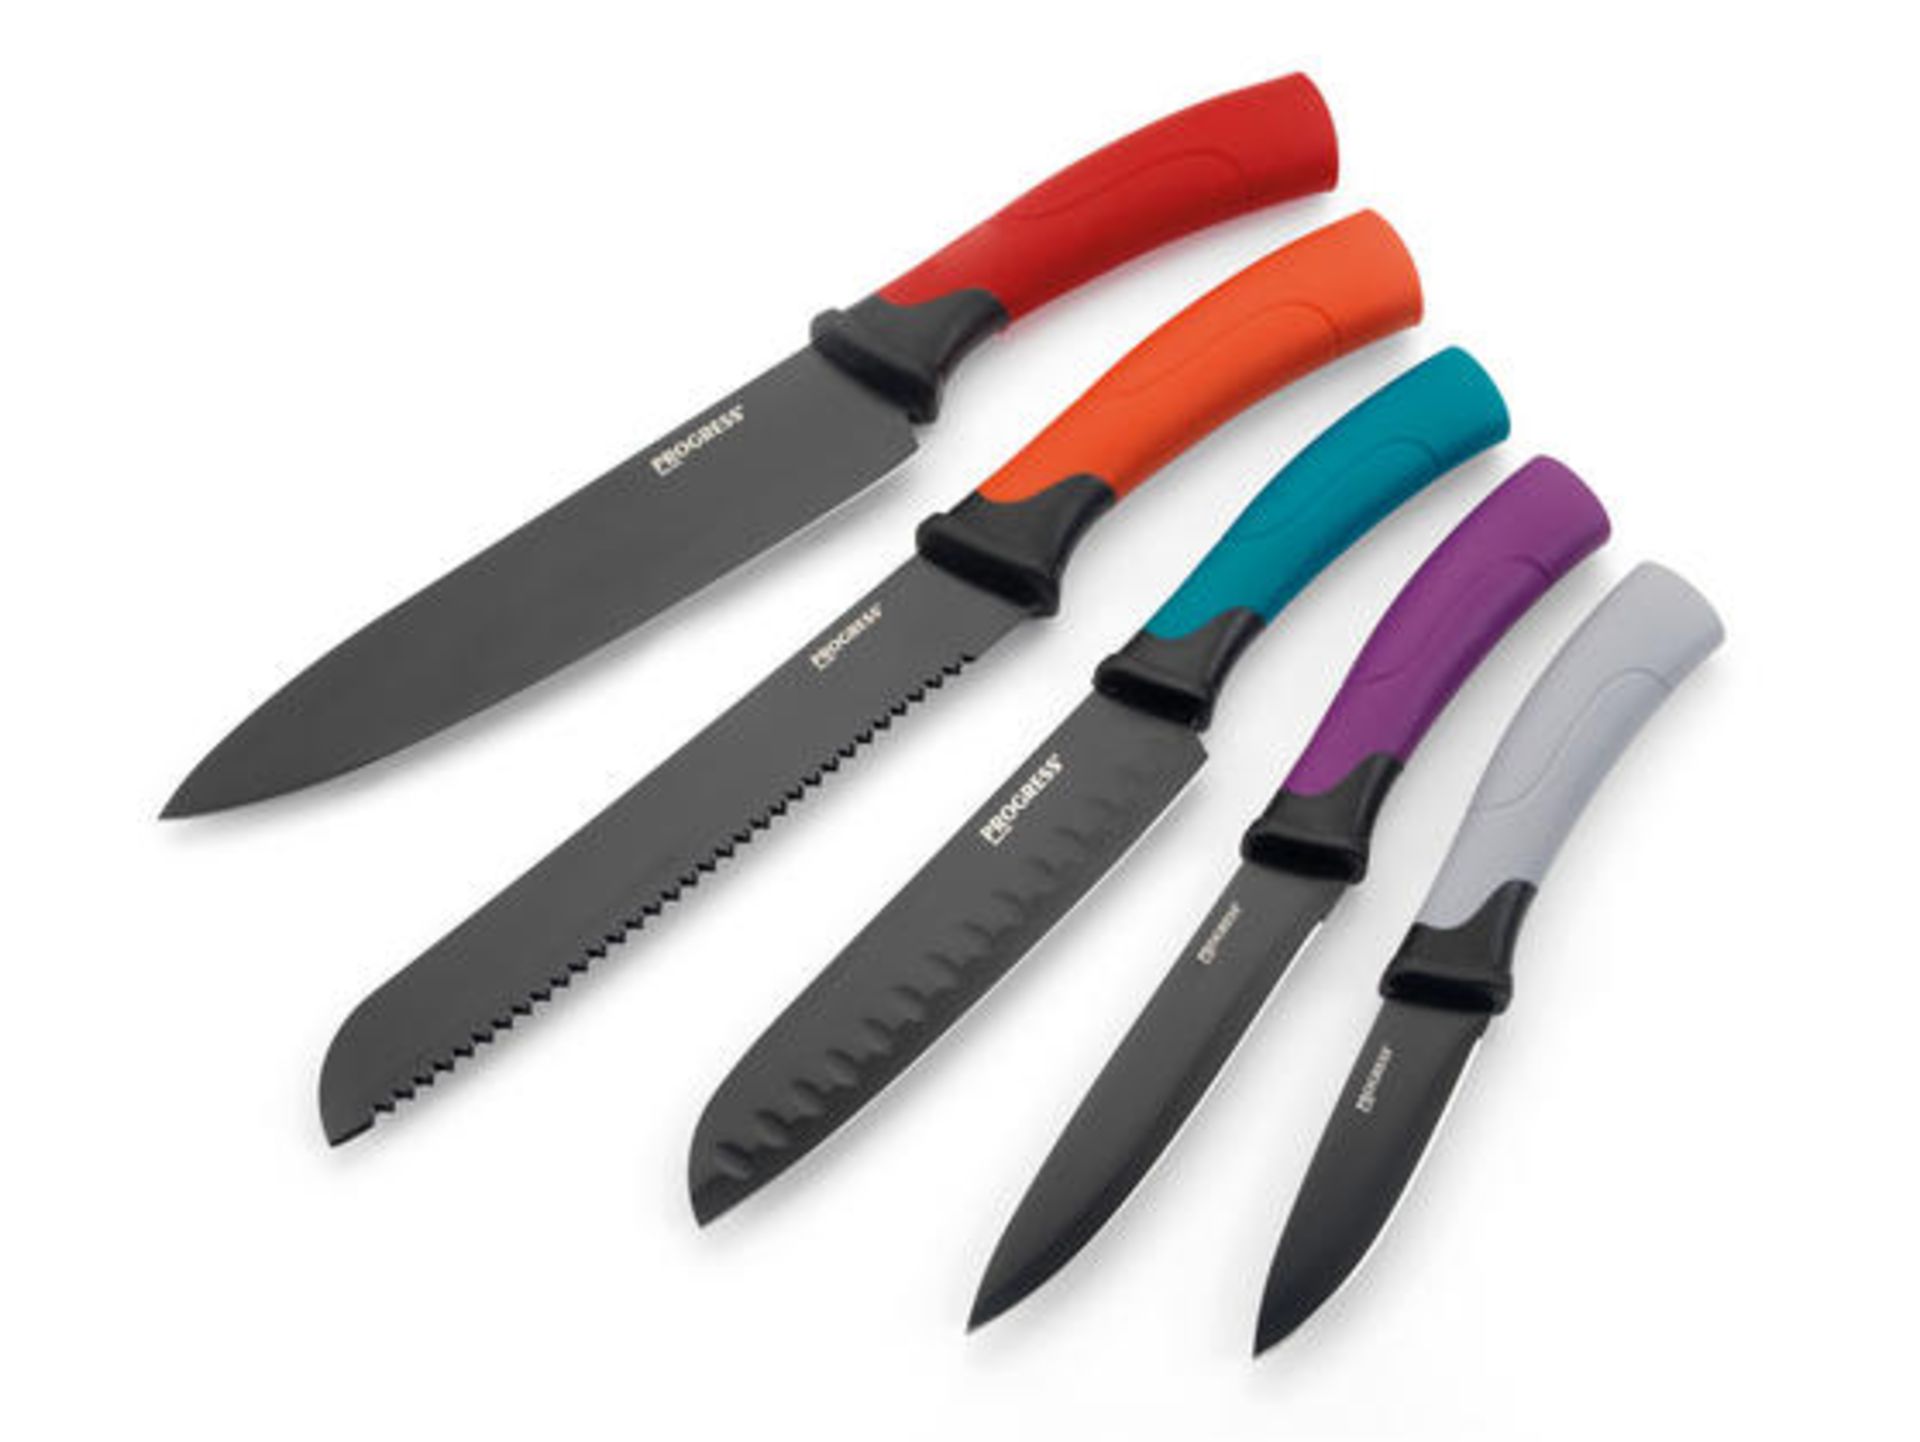 V Brand New Progress 5 Piece Smart Knife Block With Multi Coloured Handles - Secure Block locking - Image 3 of 4